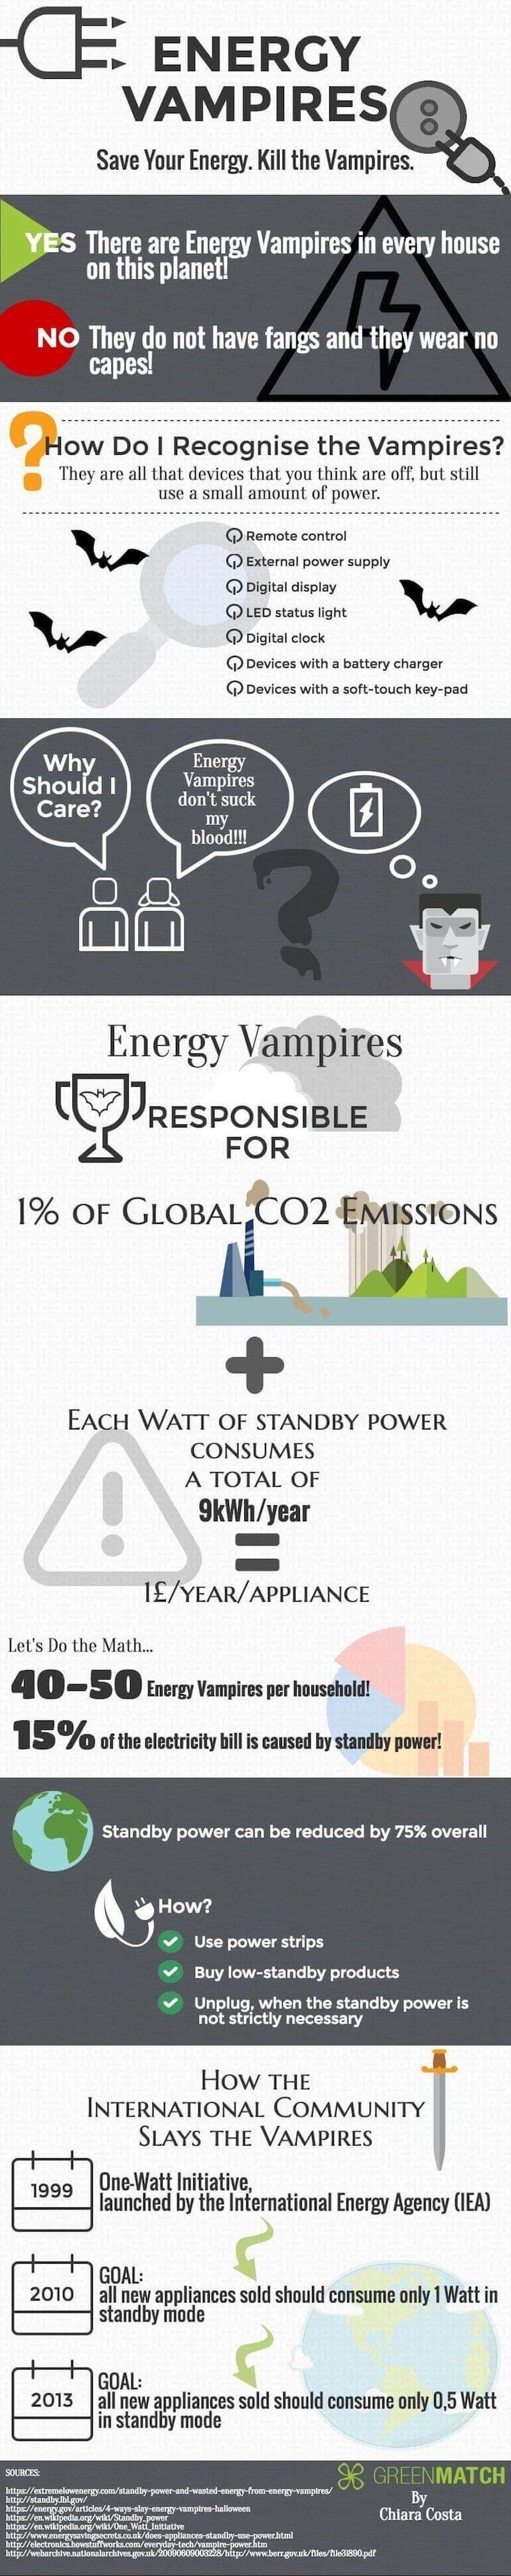 Infographic about Energy Vampires